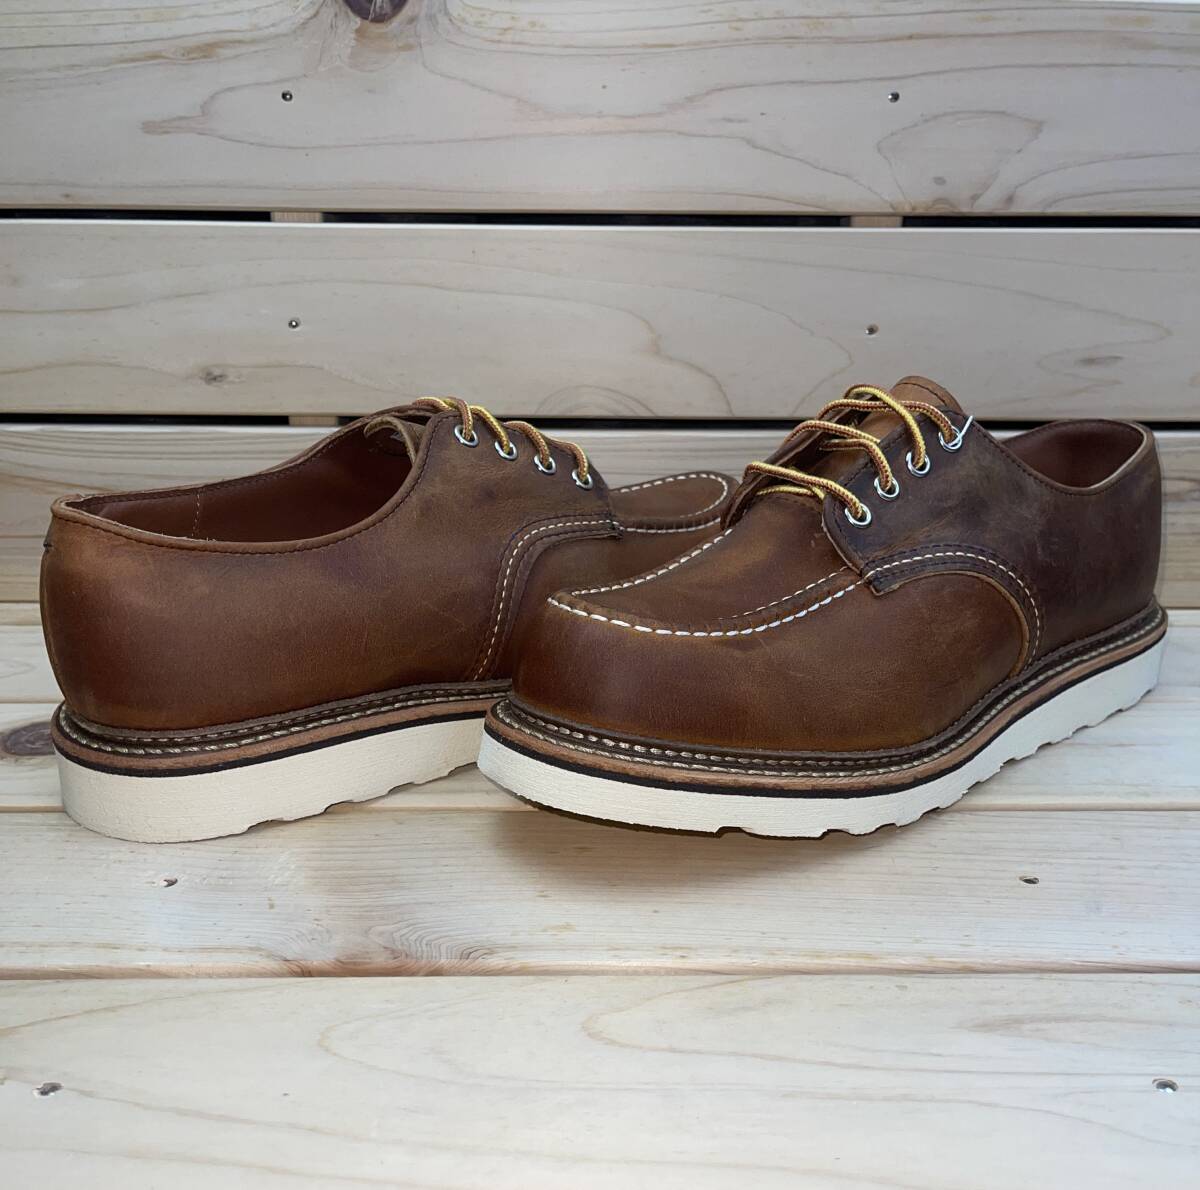  Red Wing 28cm US10 tax included regular price 39600 jpy domestic regular goods RED WING oxford 8095 copper USA America made OXFORD 17 year 